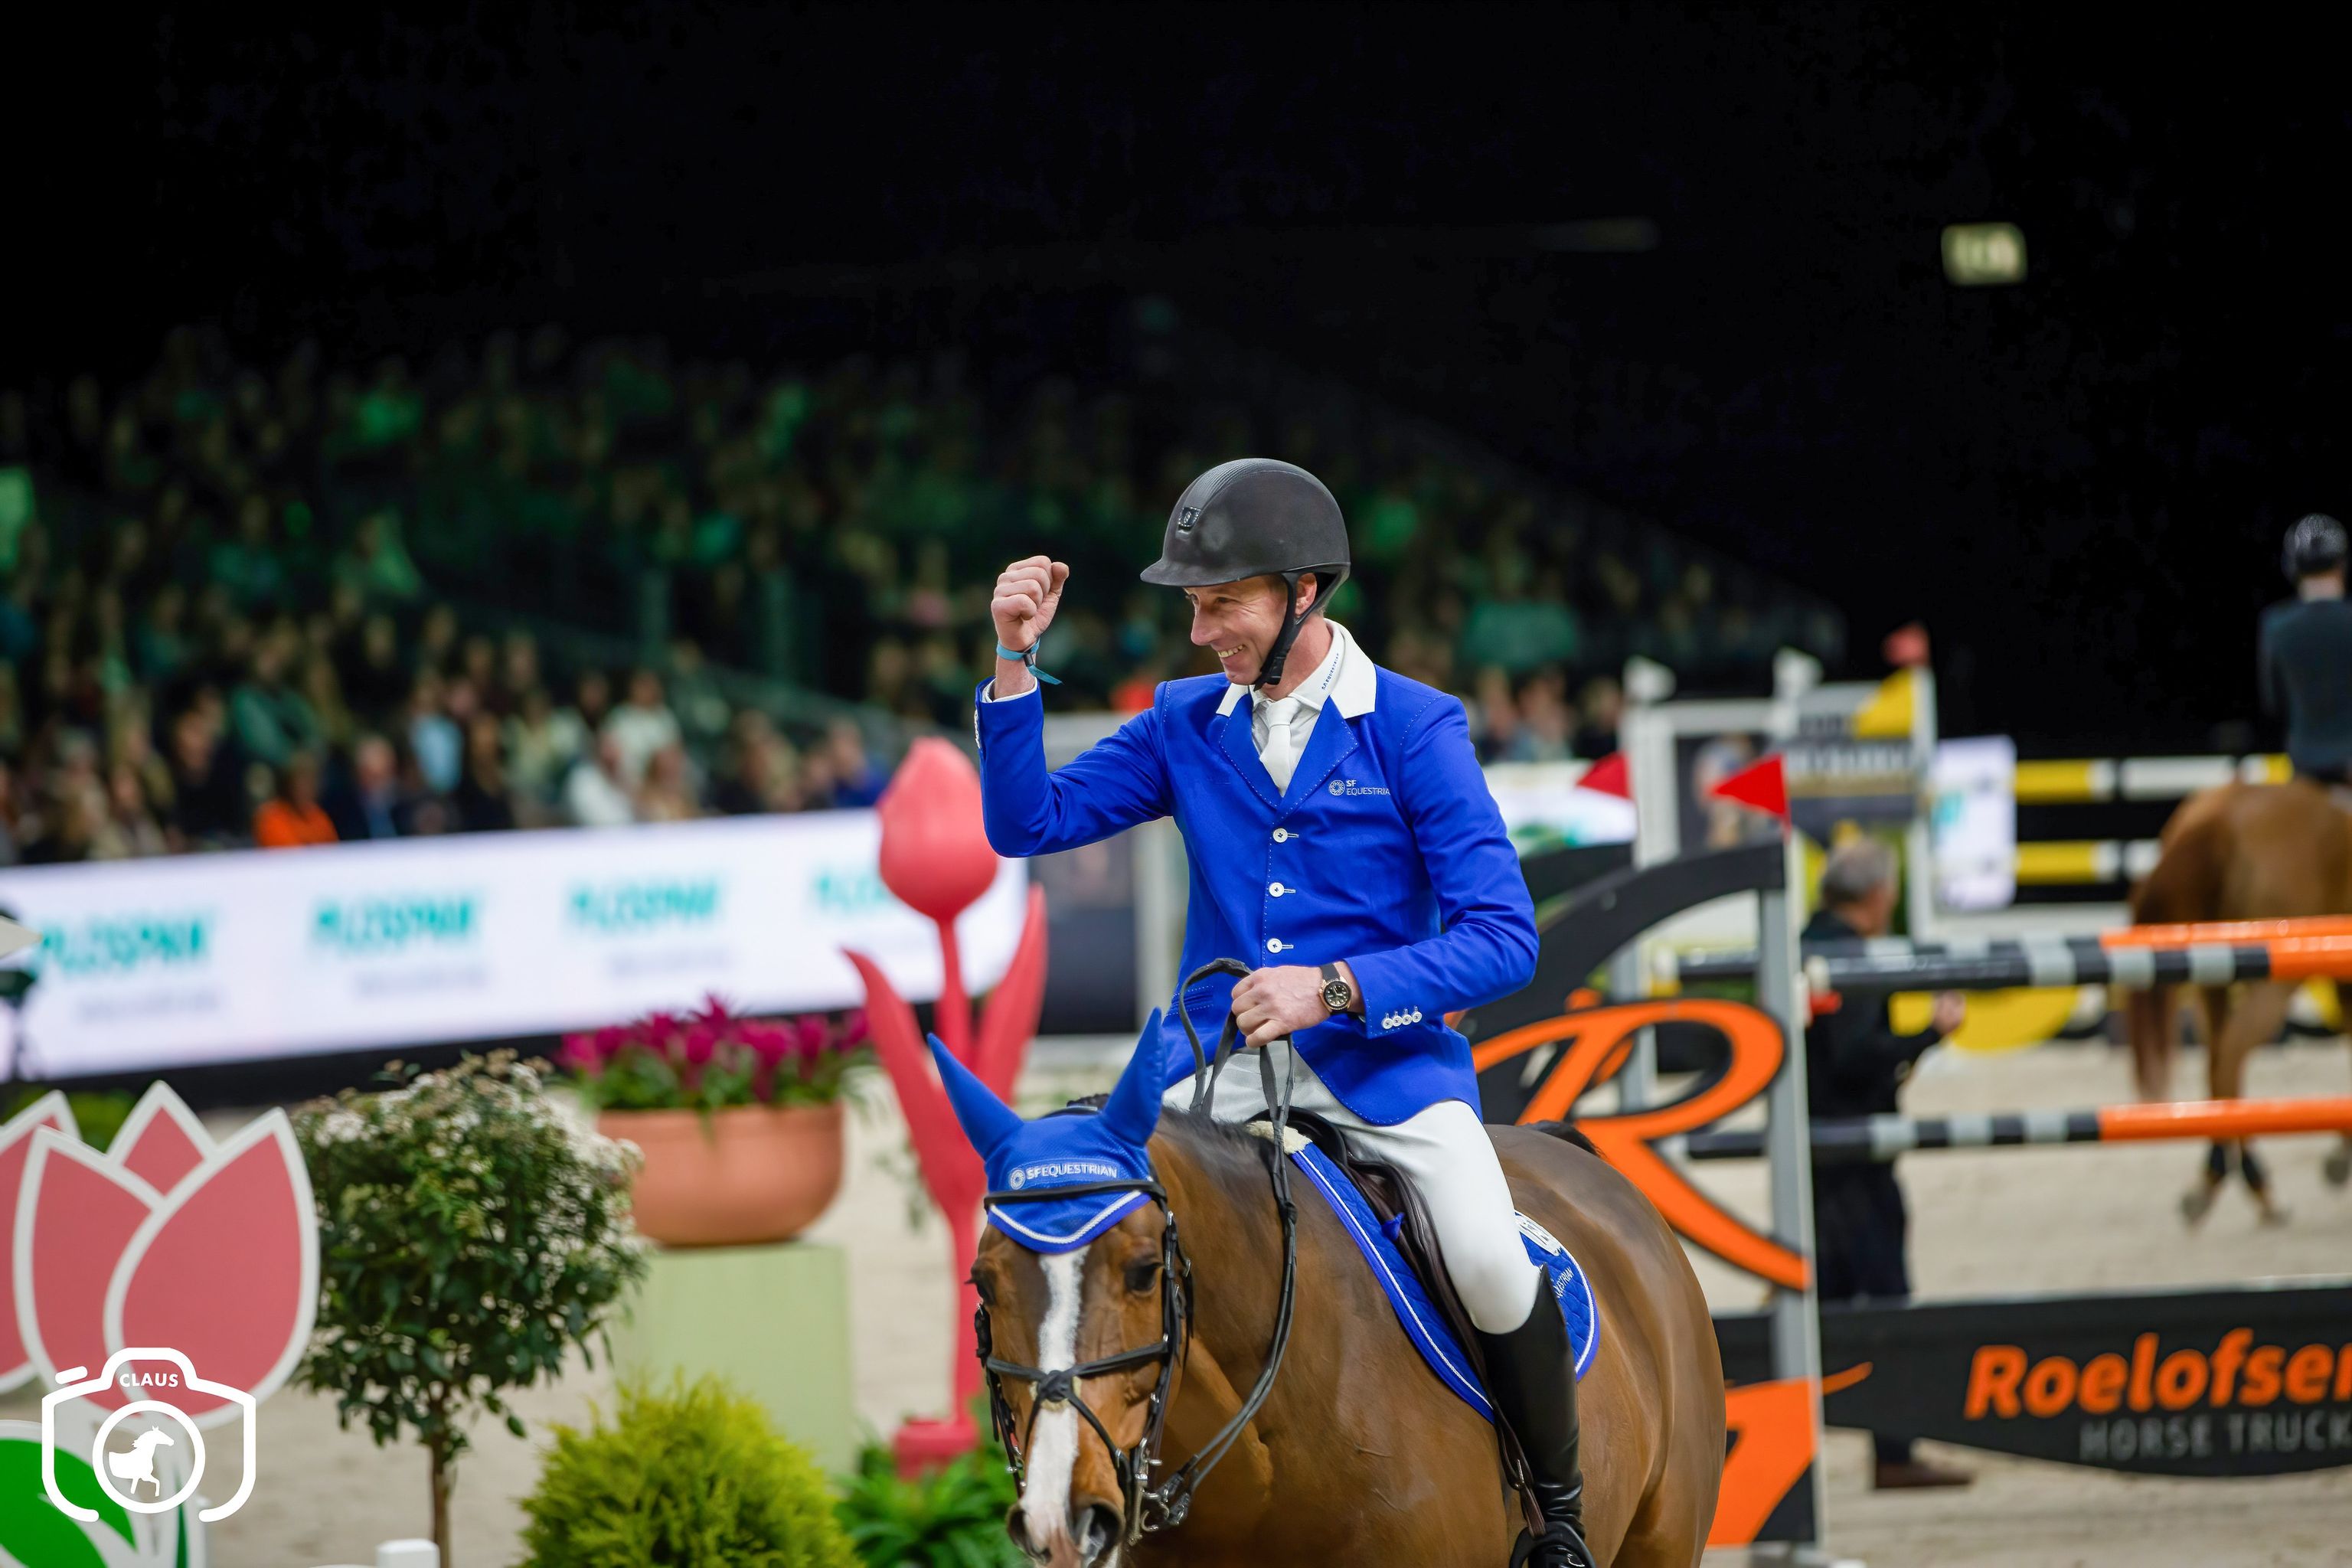 Strong horse-rider field for The Dutch Masters